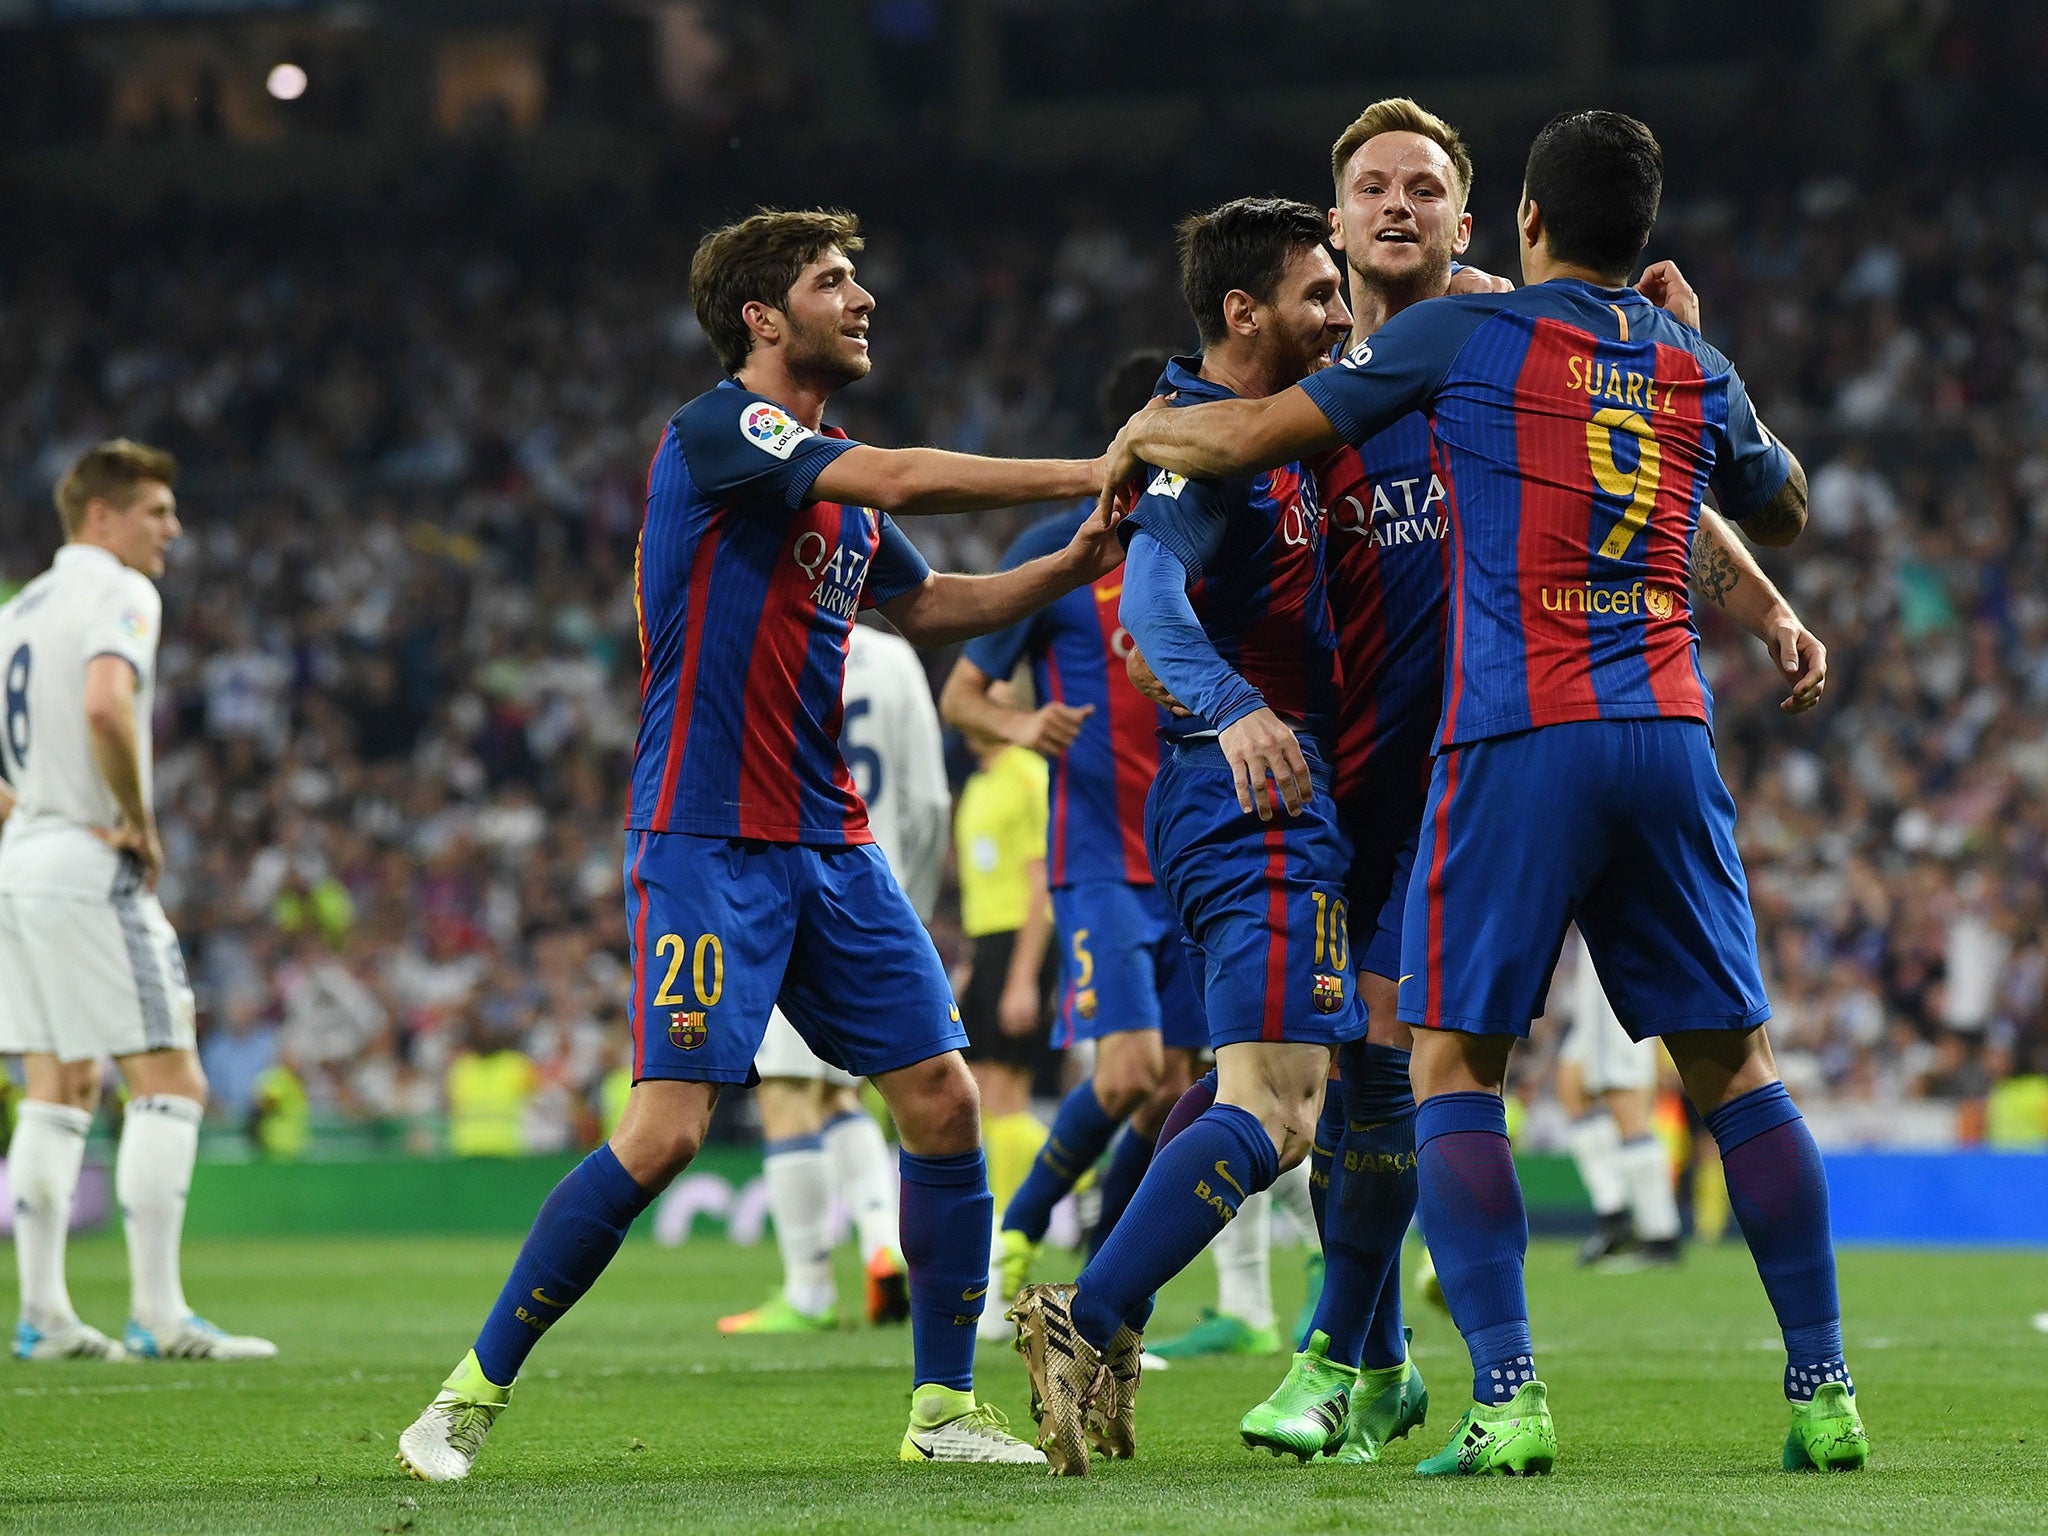 Barcelona celebrate as Lionel Messi inspired the 3-2 victory over Real Madrid